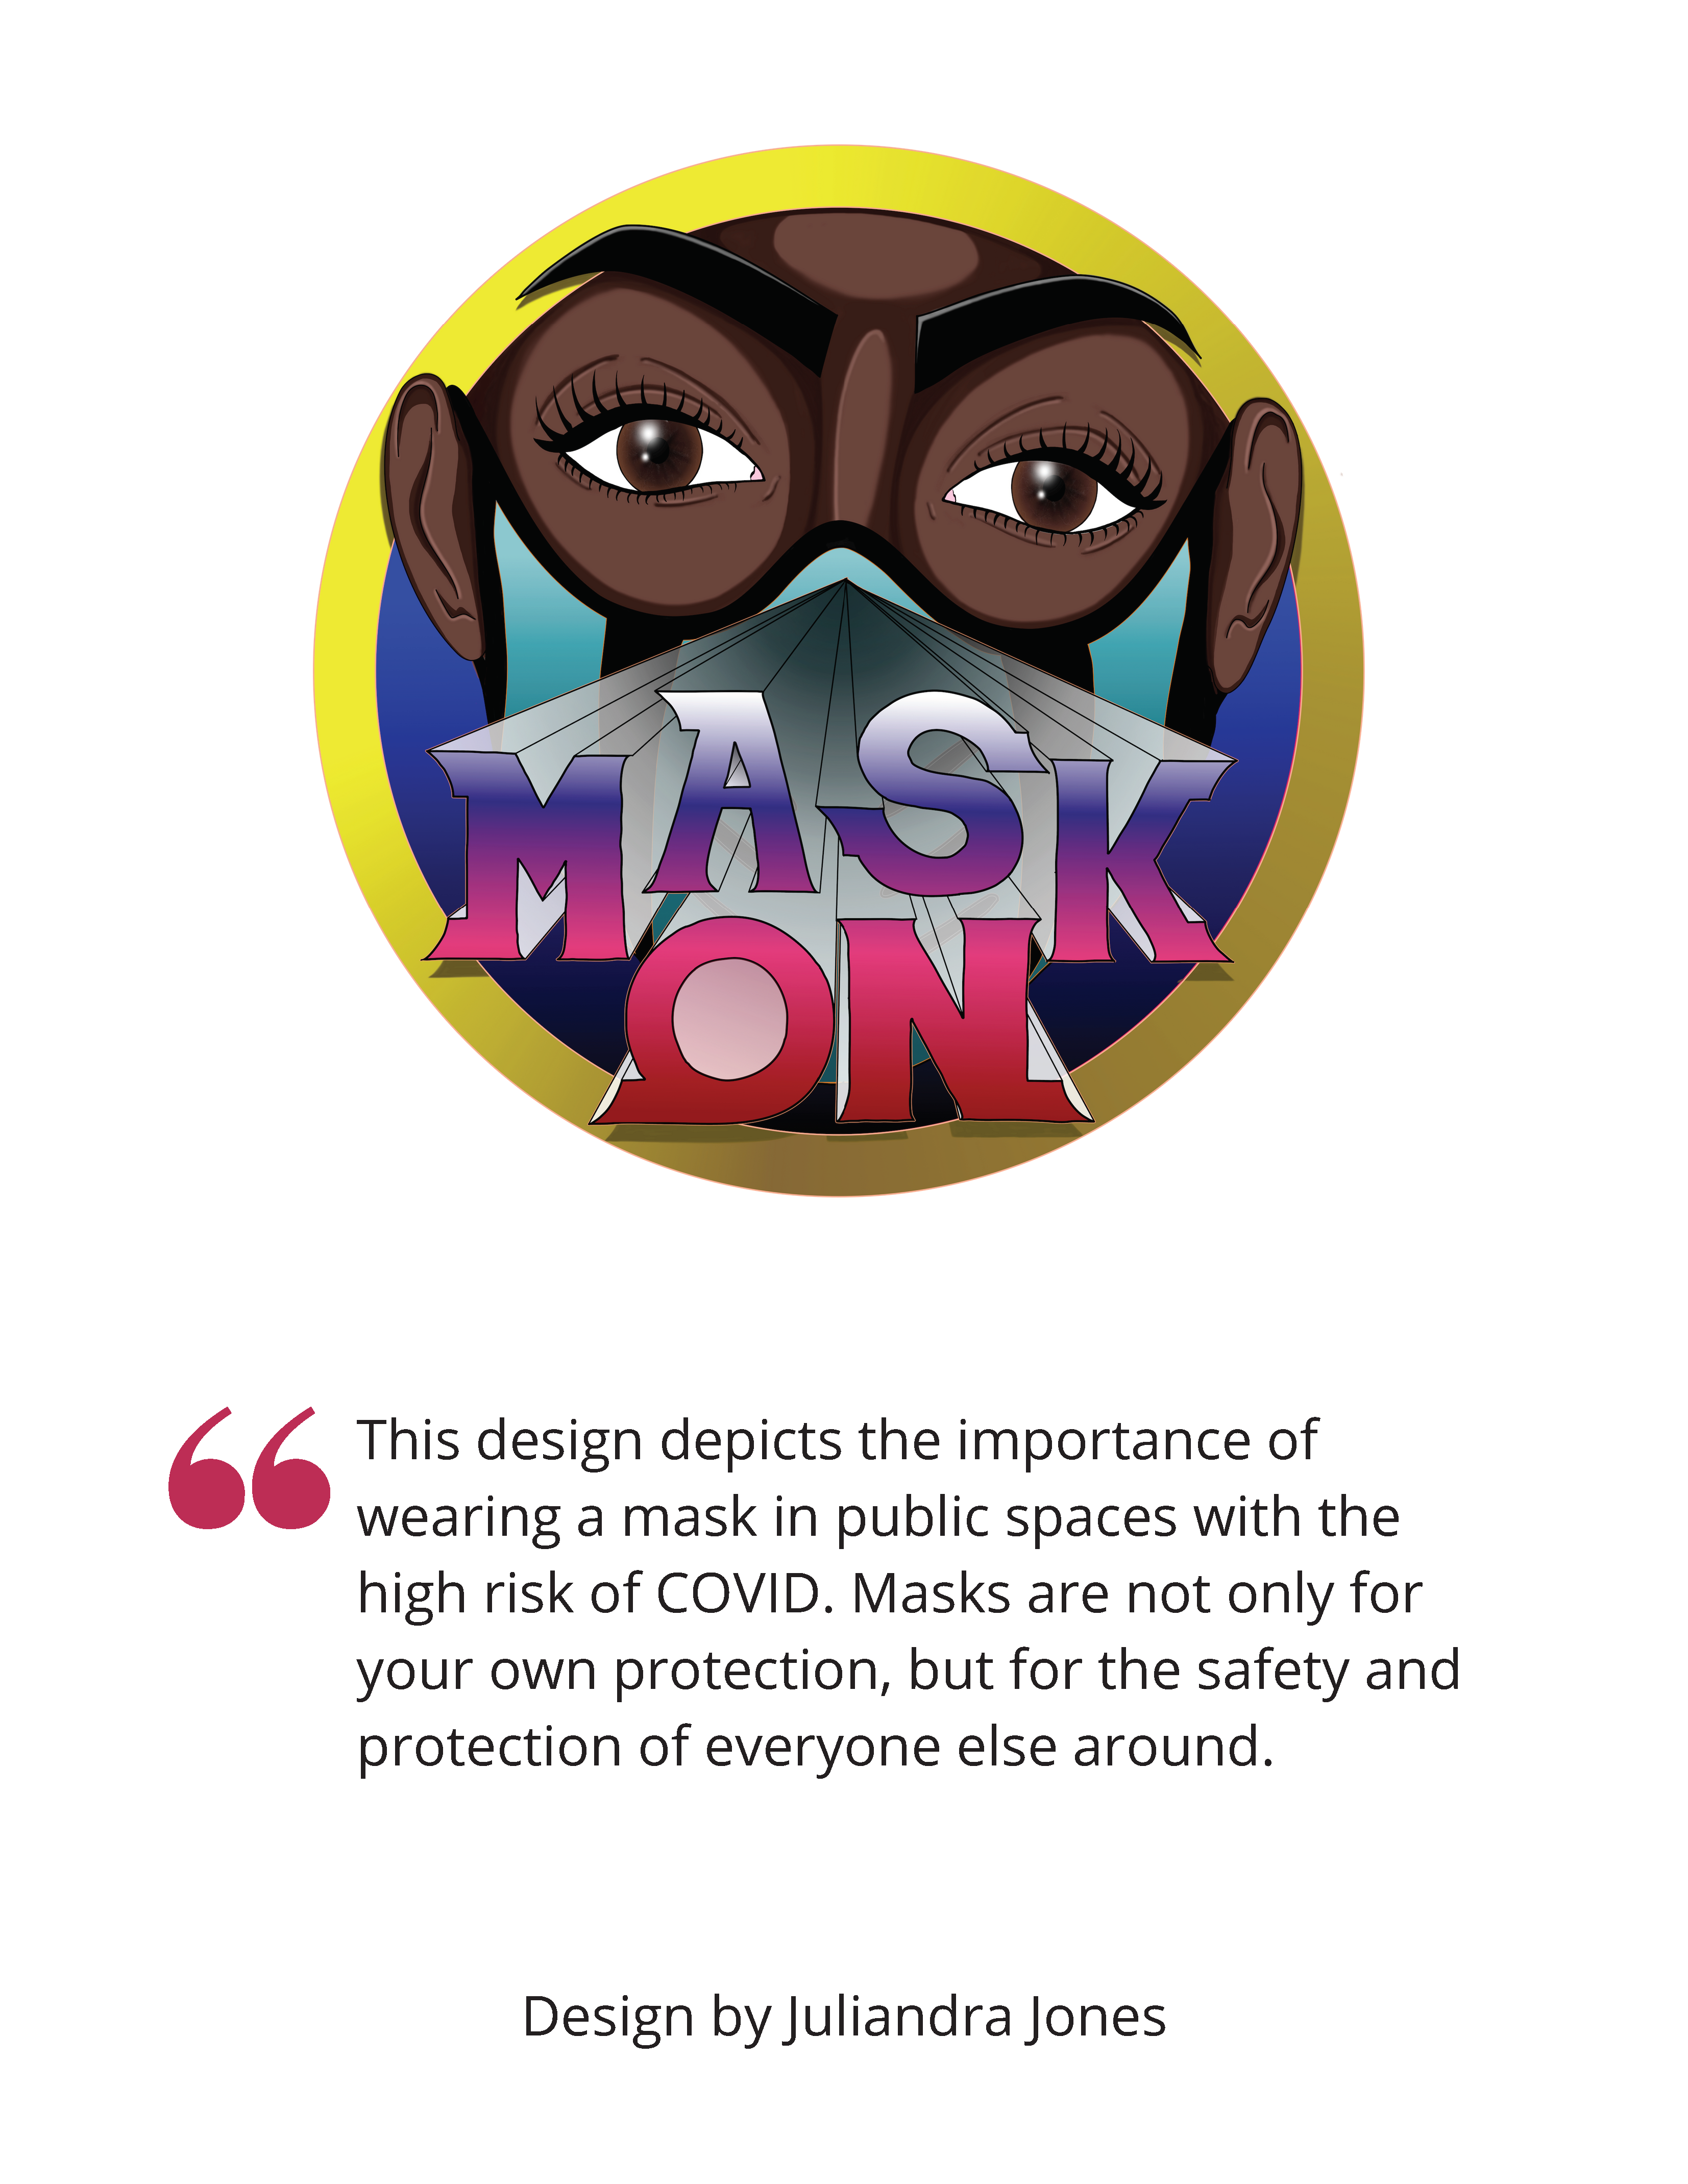 Image shows a person wearing a mask, with the words "Mask On" projecting out towards the viewer from the mask